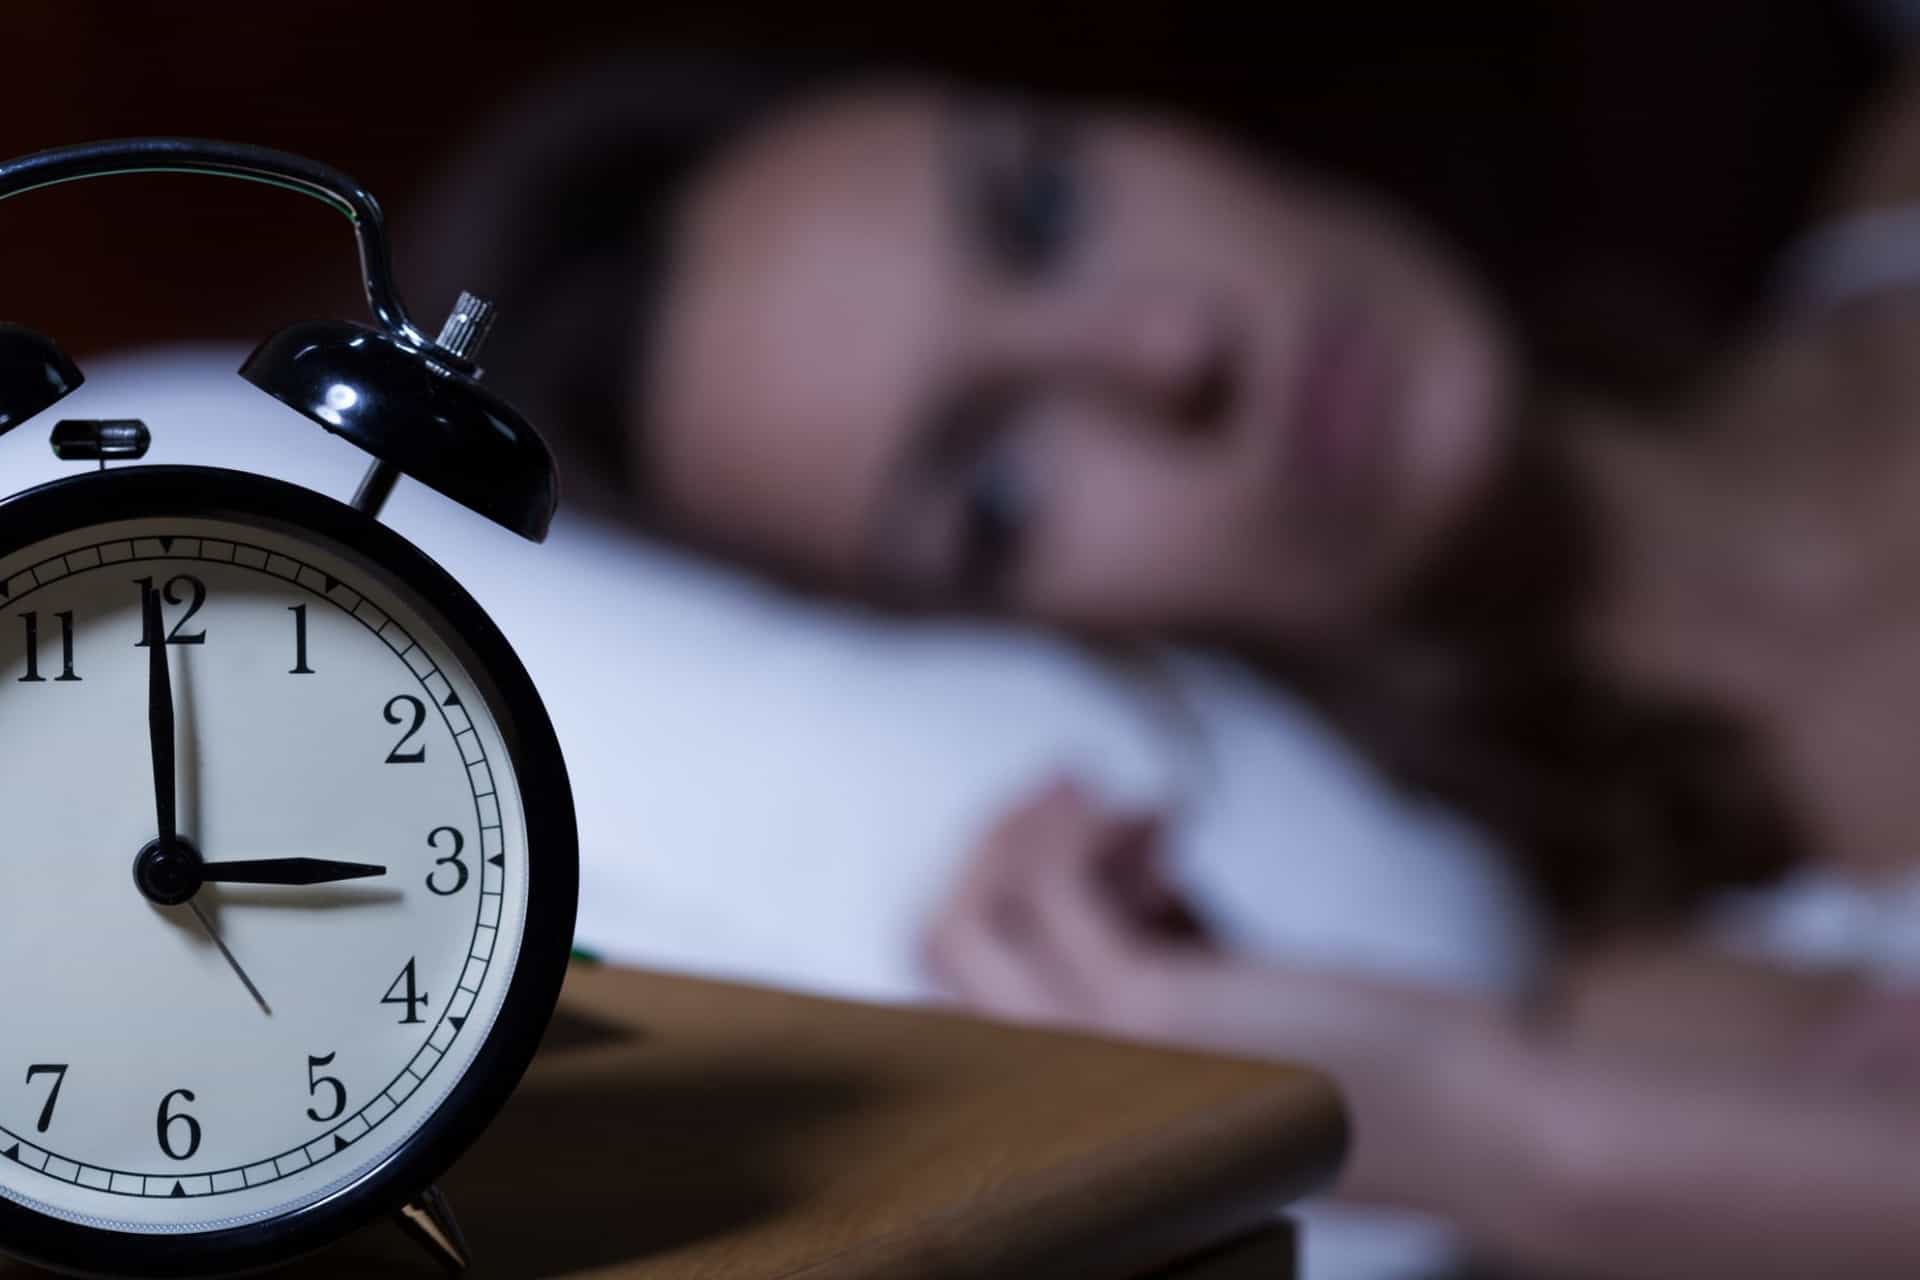 Treatment methods to solve the problem of insomnia